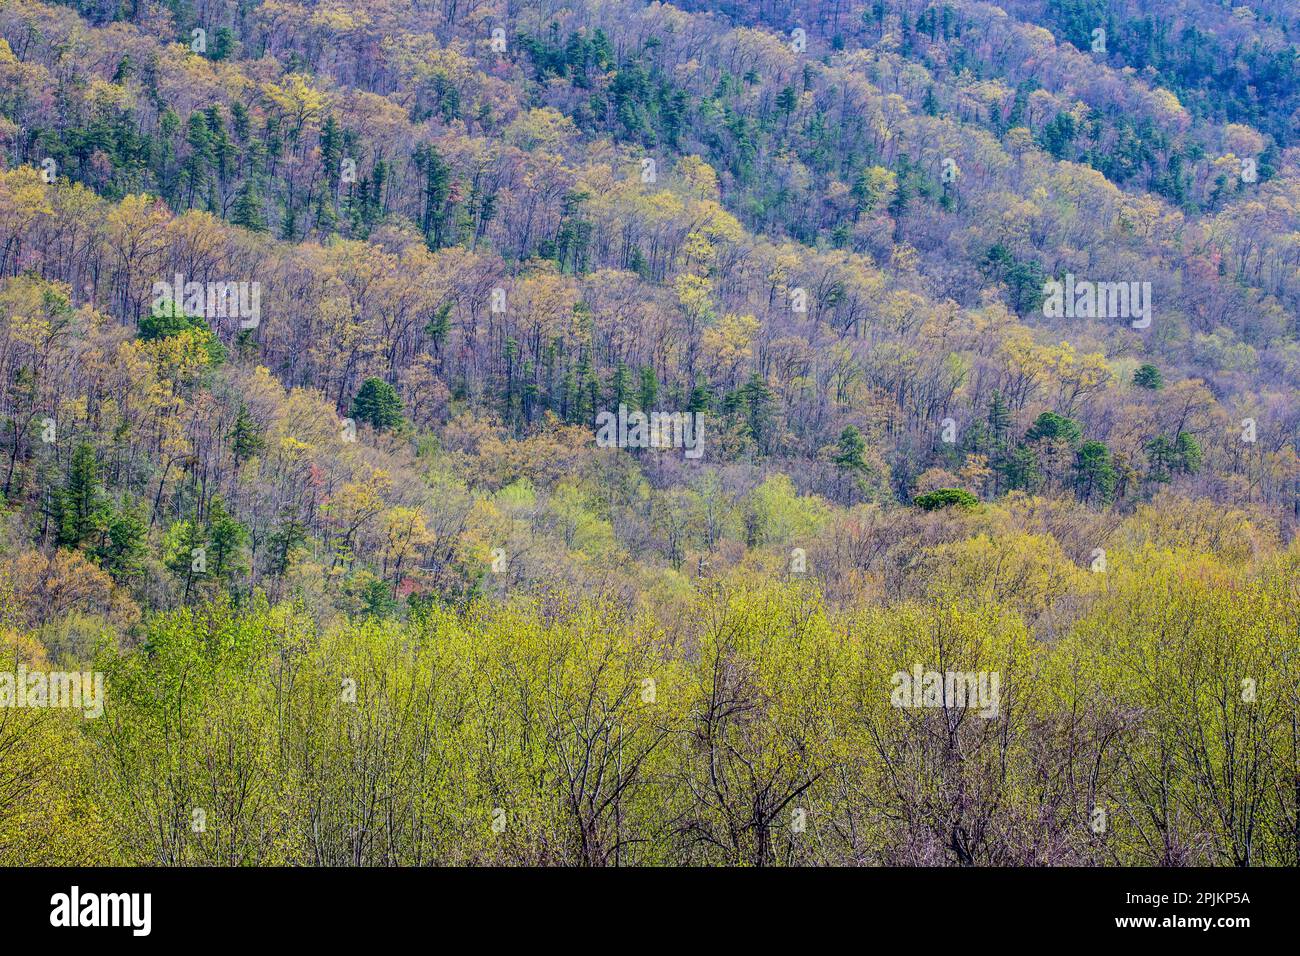 USA, Tennessee. Great Smoky Mountains National Park springtime with hardwood forest budding out Stock Photo